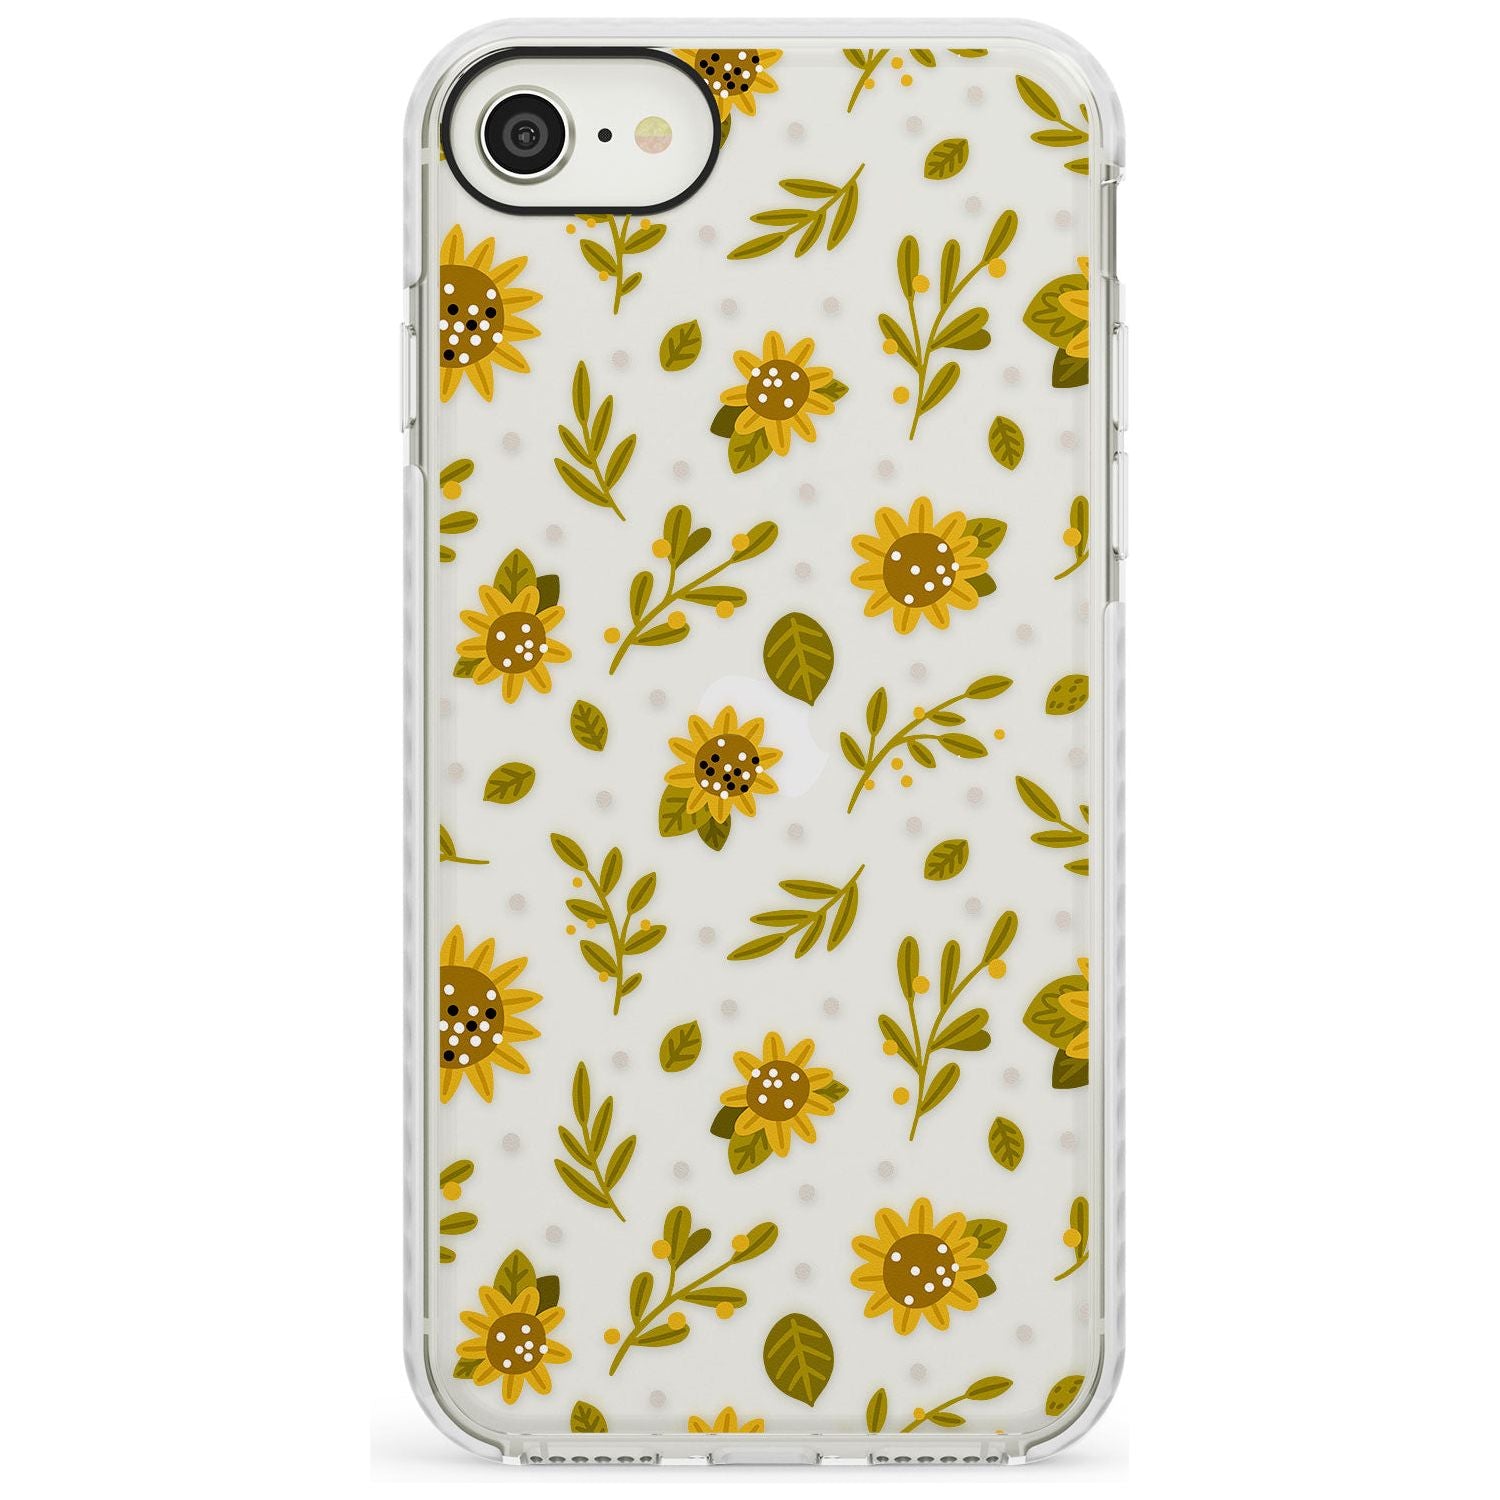 Sweet as Honey Patterns: Sunflowers (Clear) Impact Phone Case for iPhone SE 8 7 Plus